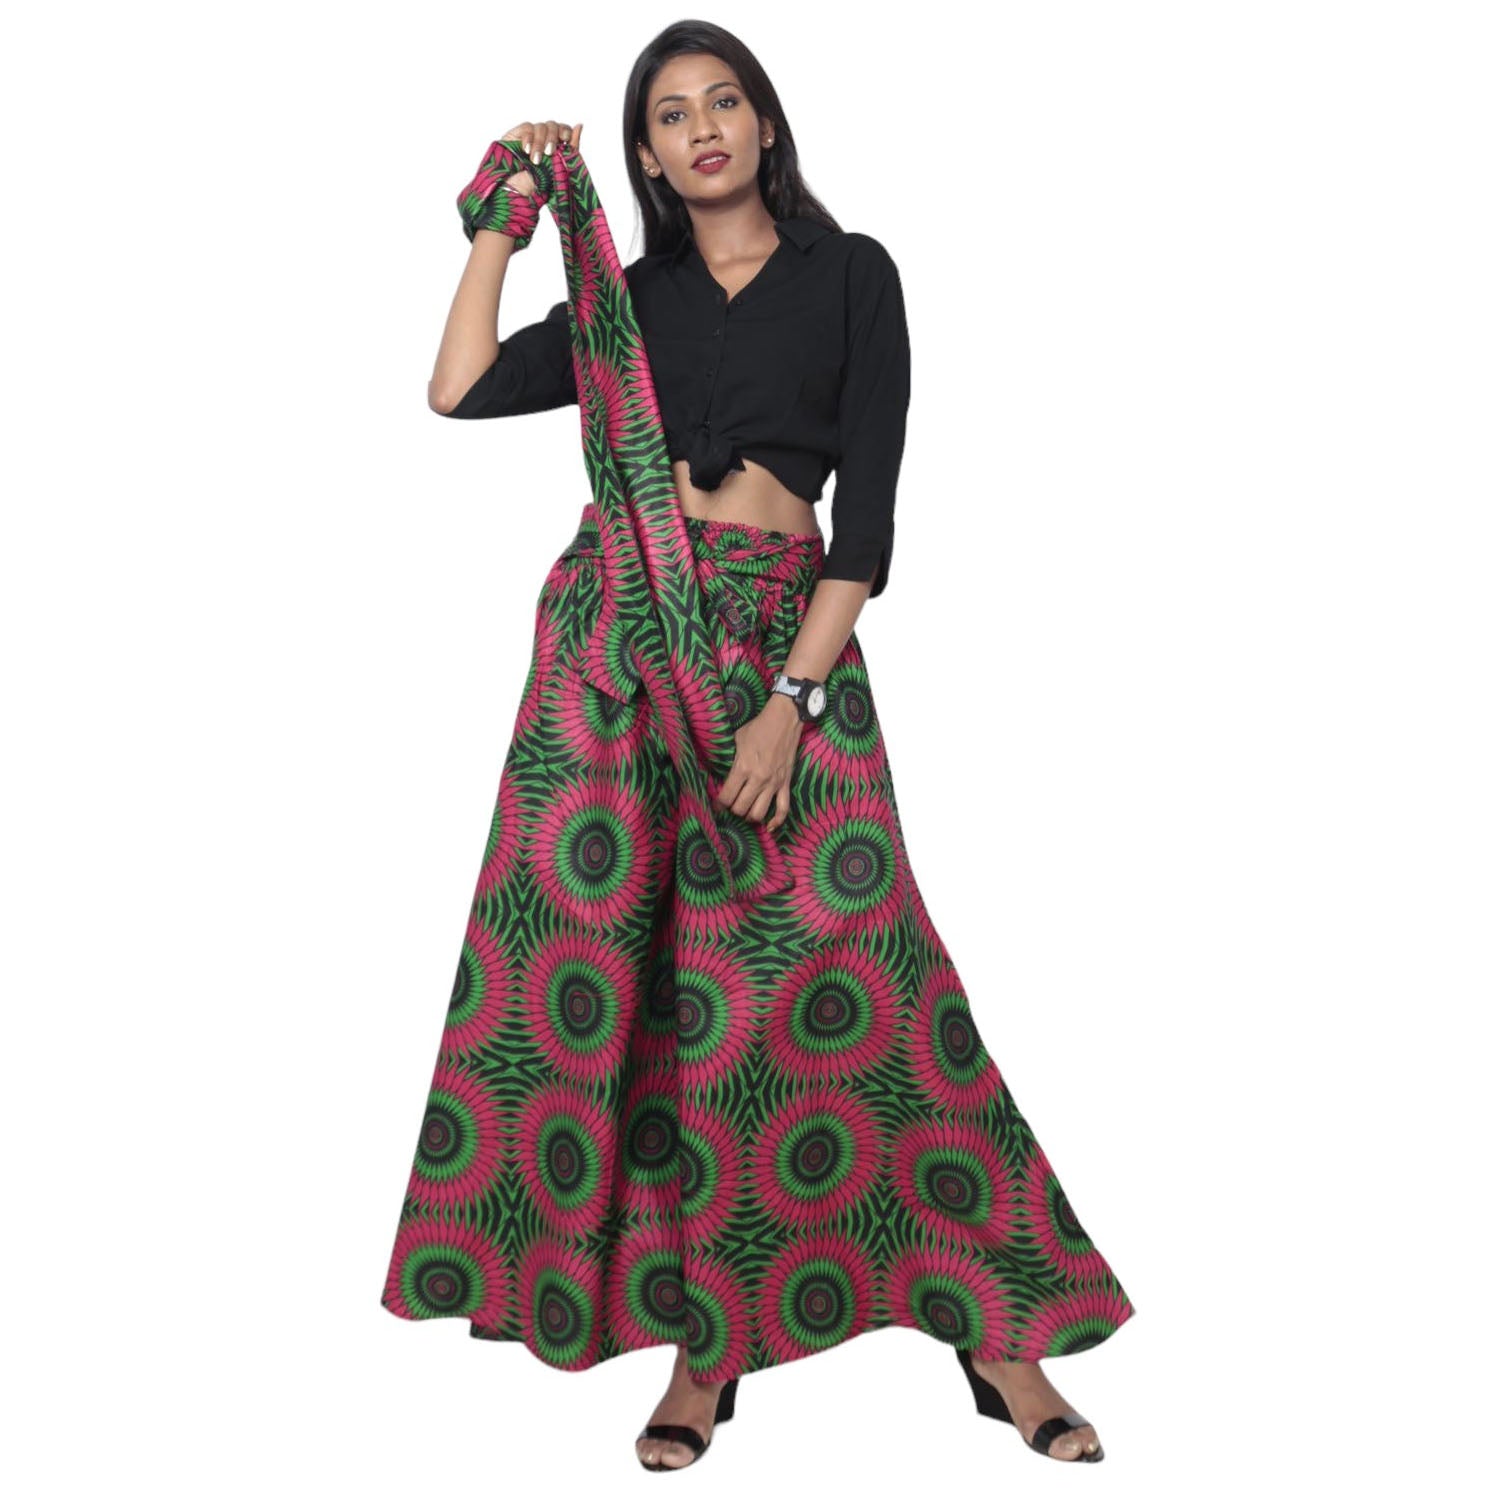 Women's African Printed Palazzo Pants with Tie Waist -- FI-50